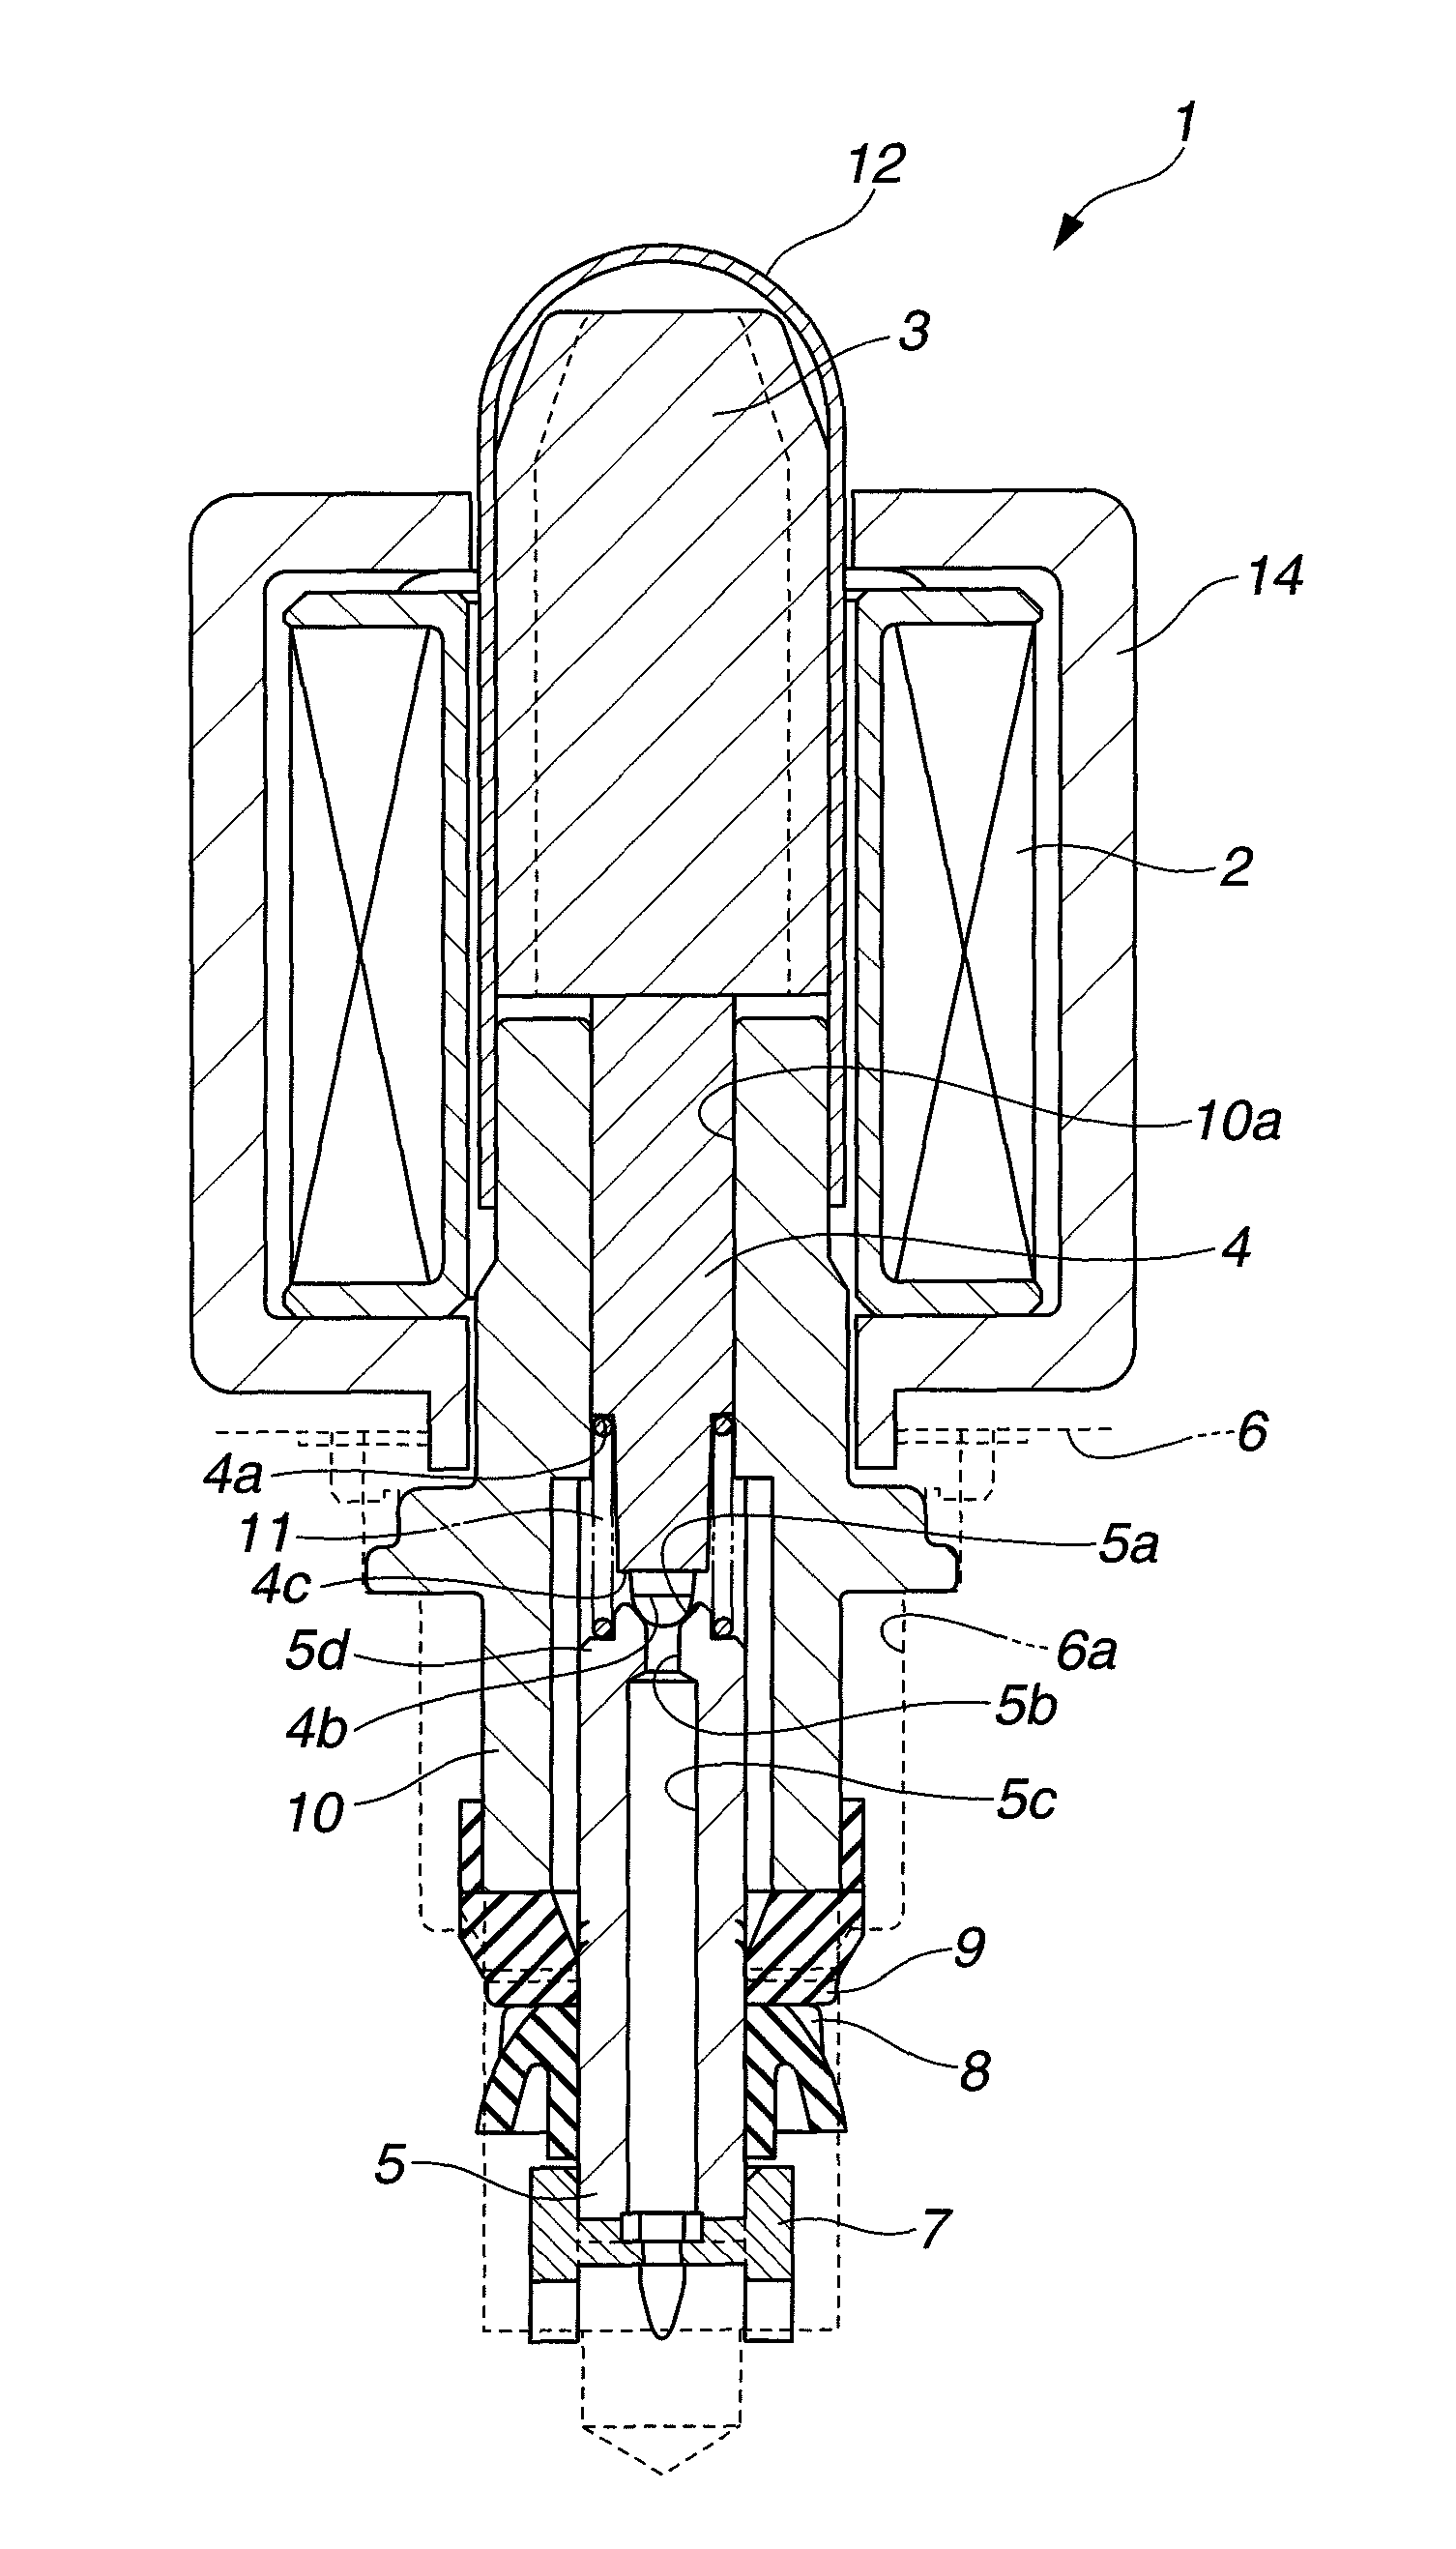 Normally-open solenoid valve including plunger formed with pressure receiving portion